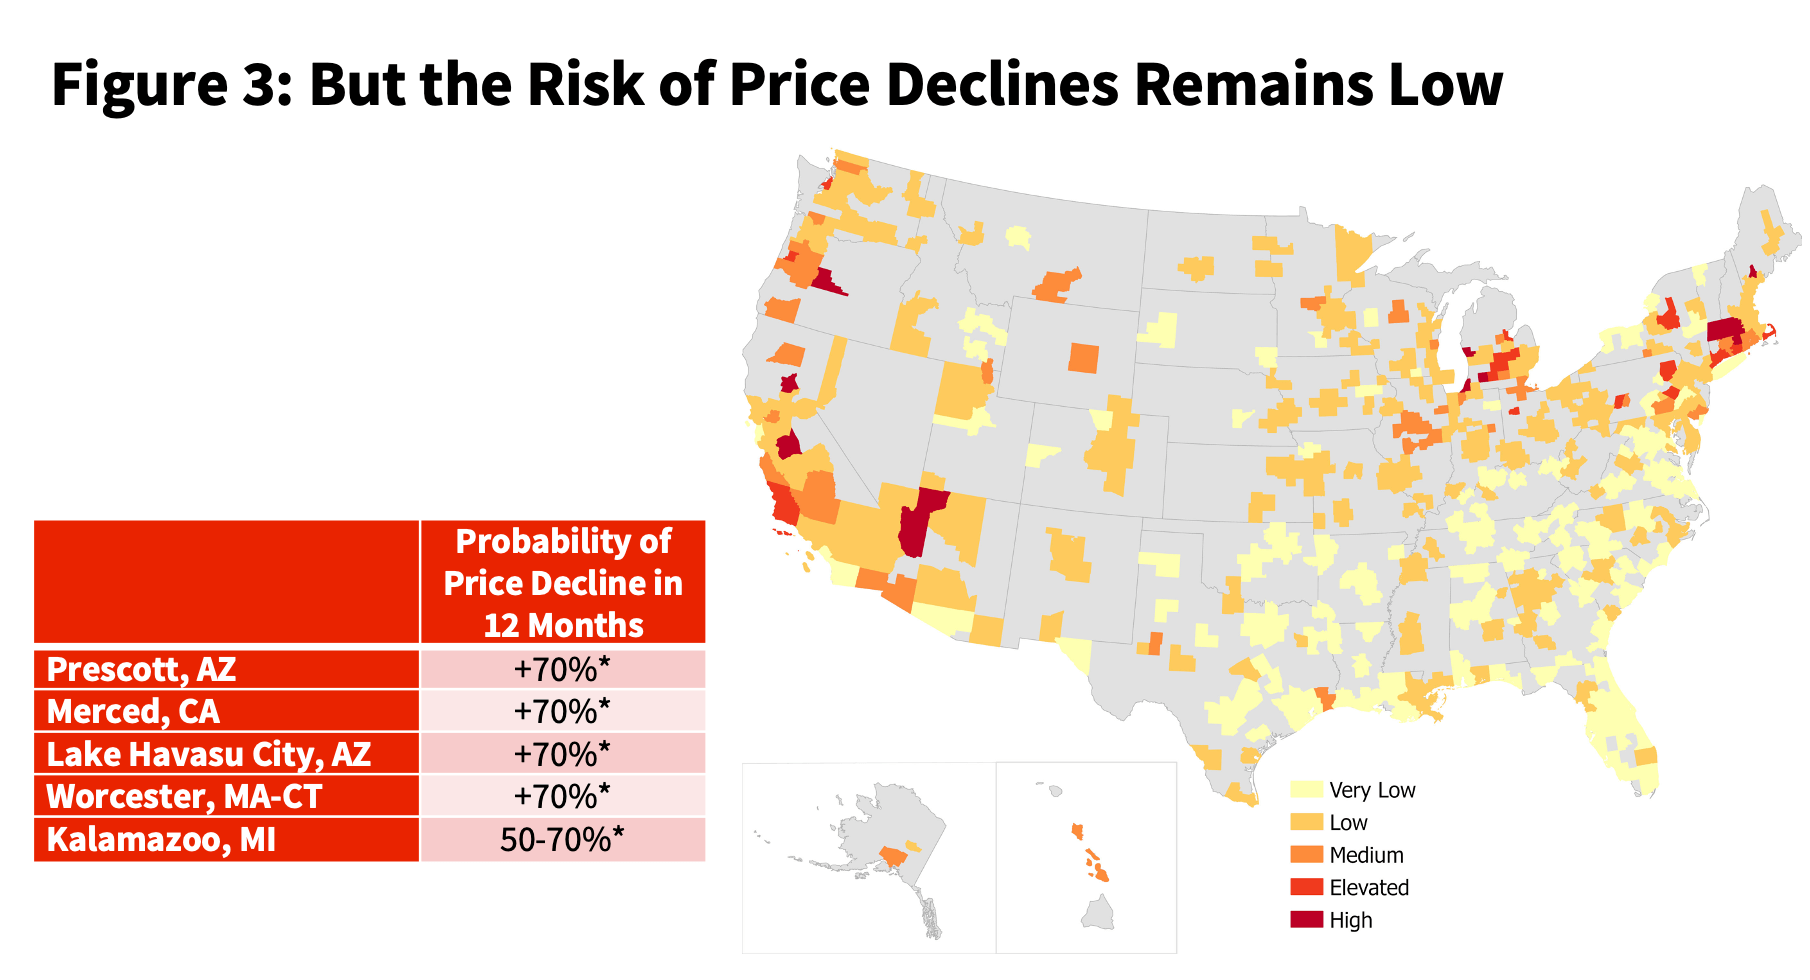 Figure 3: But the Risk of Price Declines Remains Low